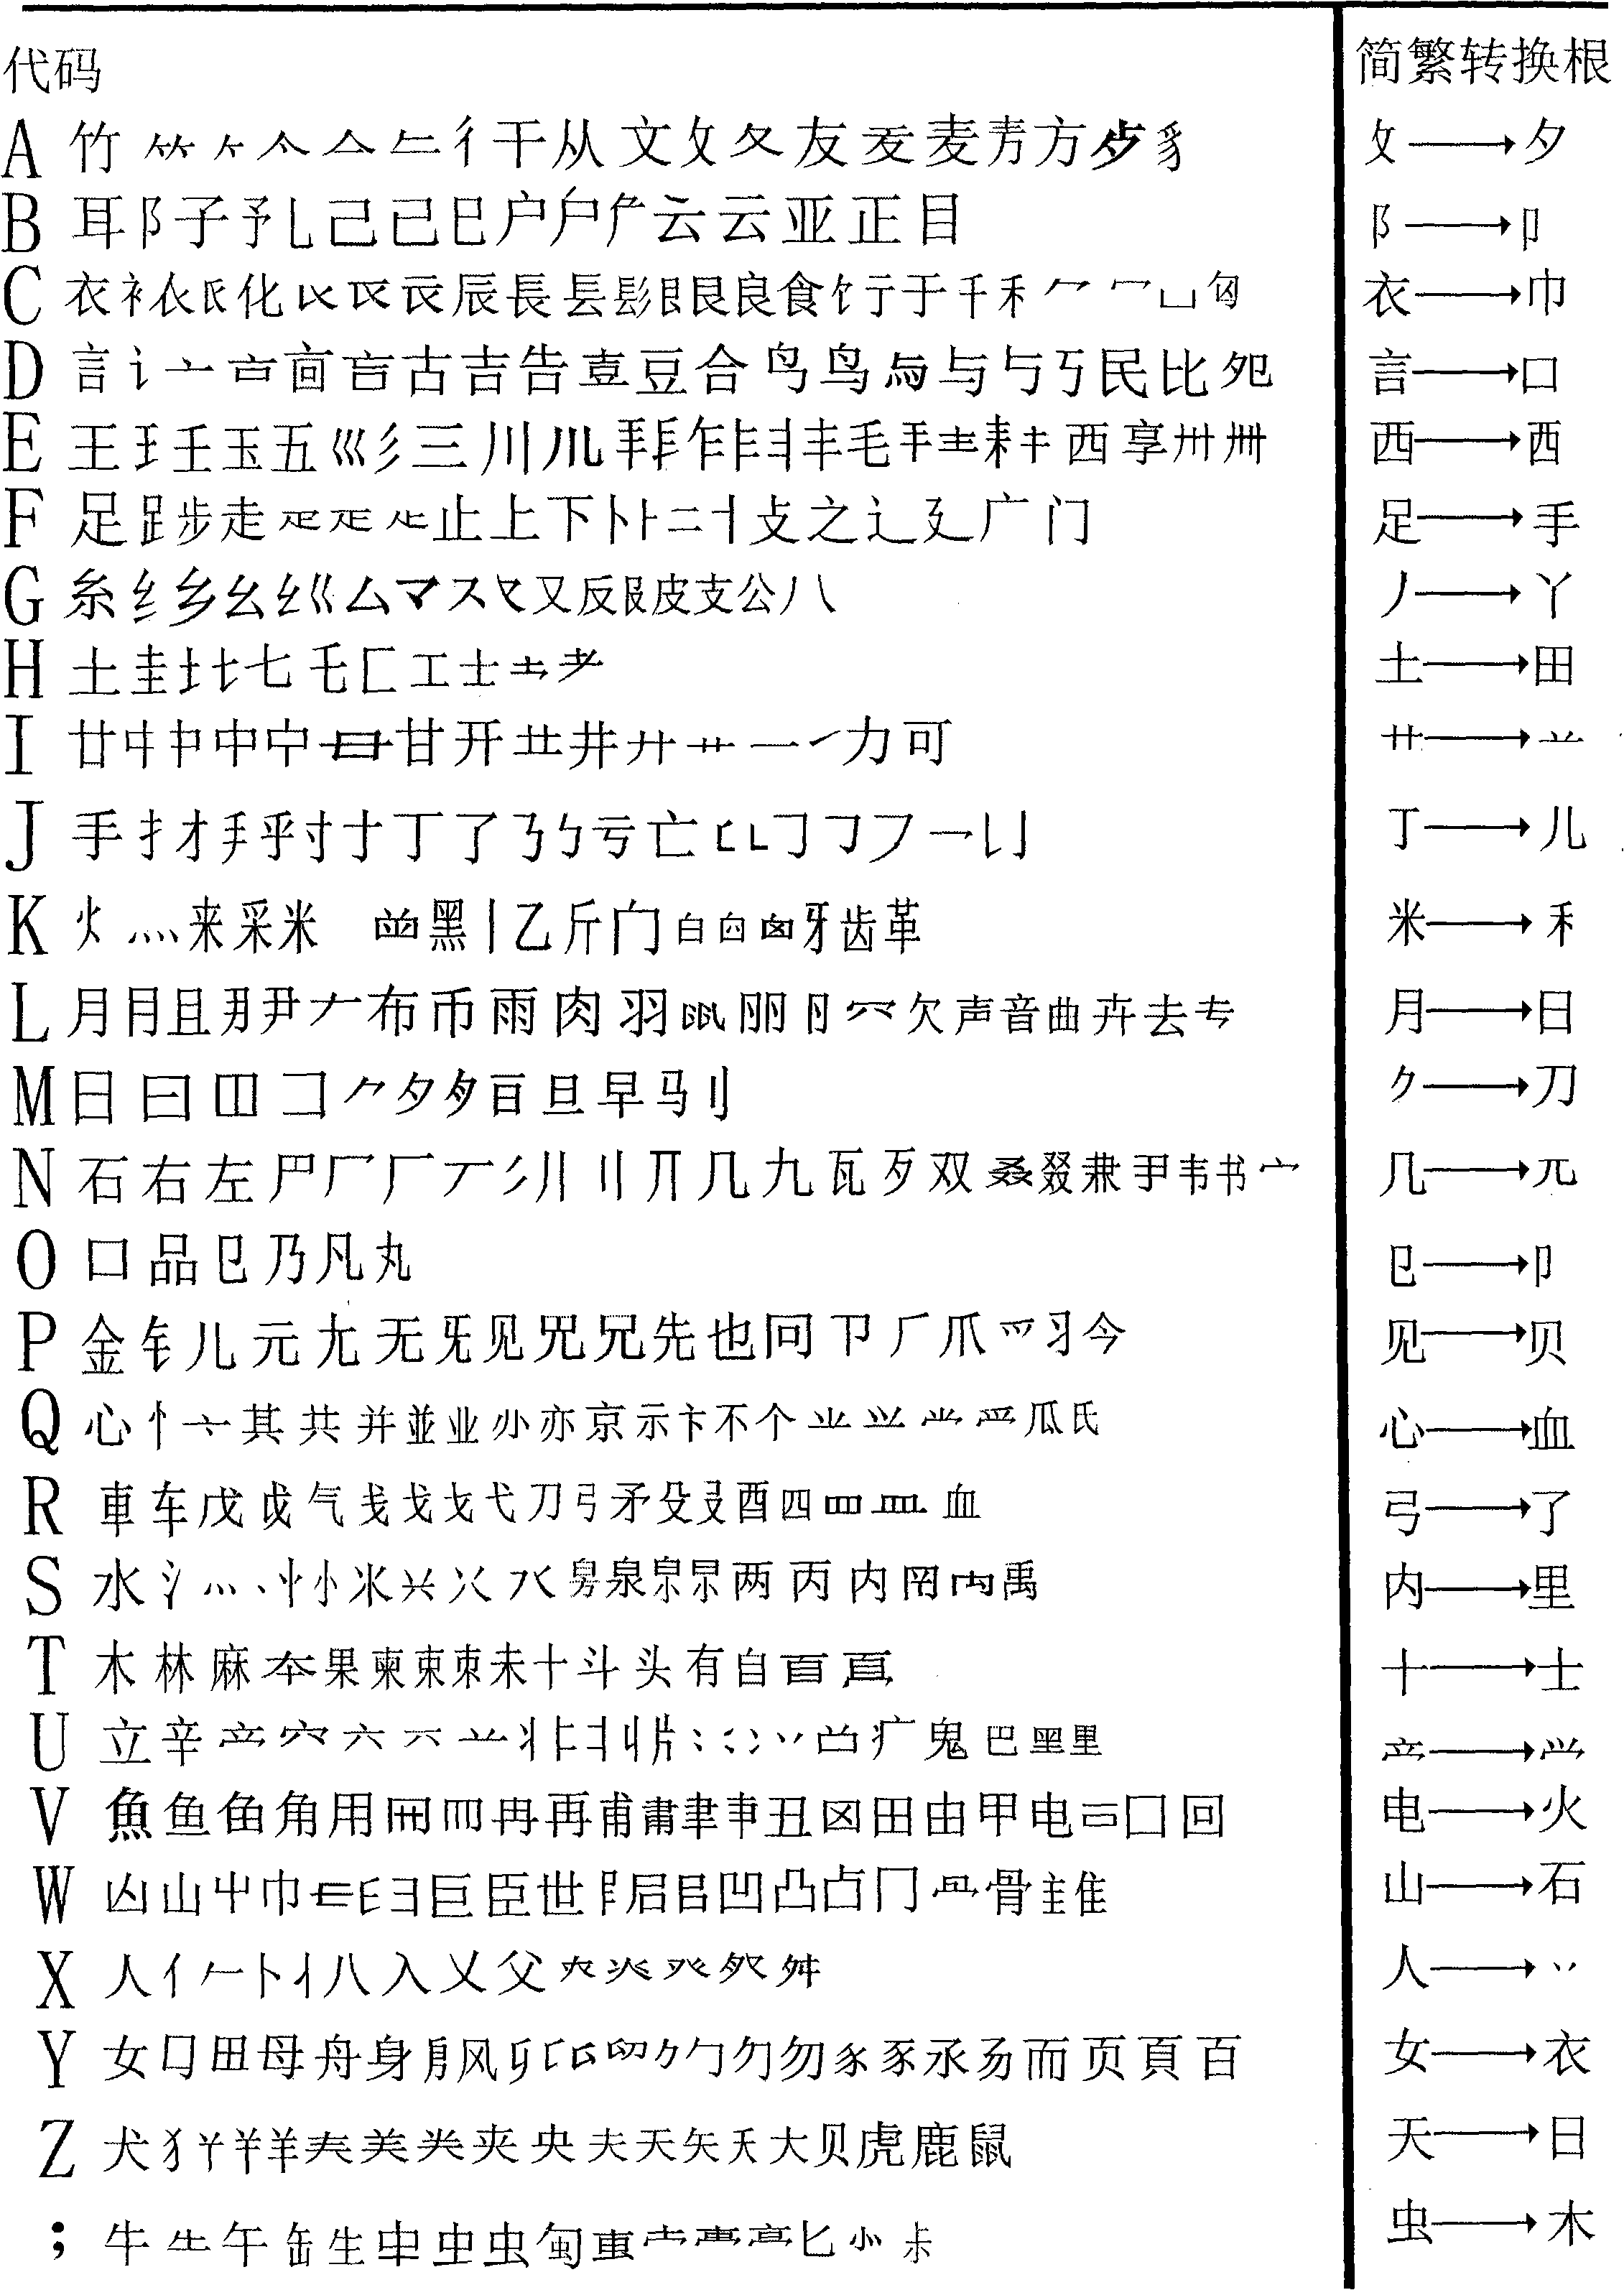 Simplified and traditional Chinese input method with no need of remembering codes